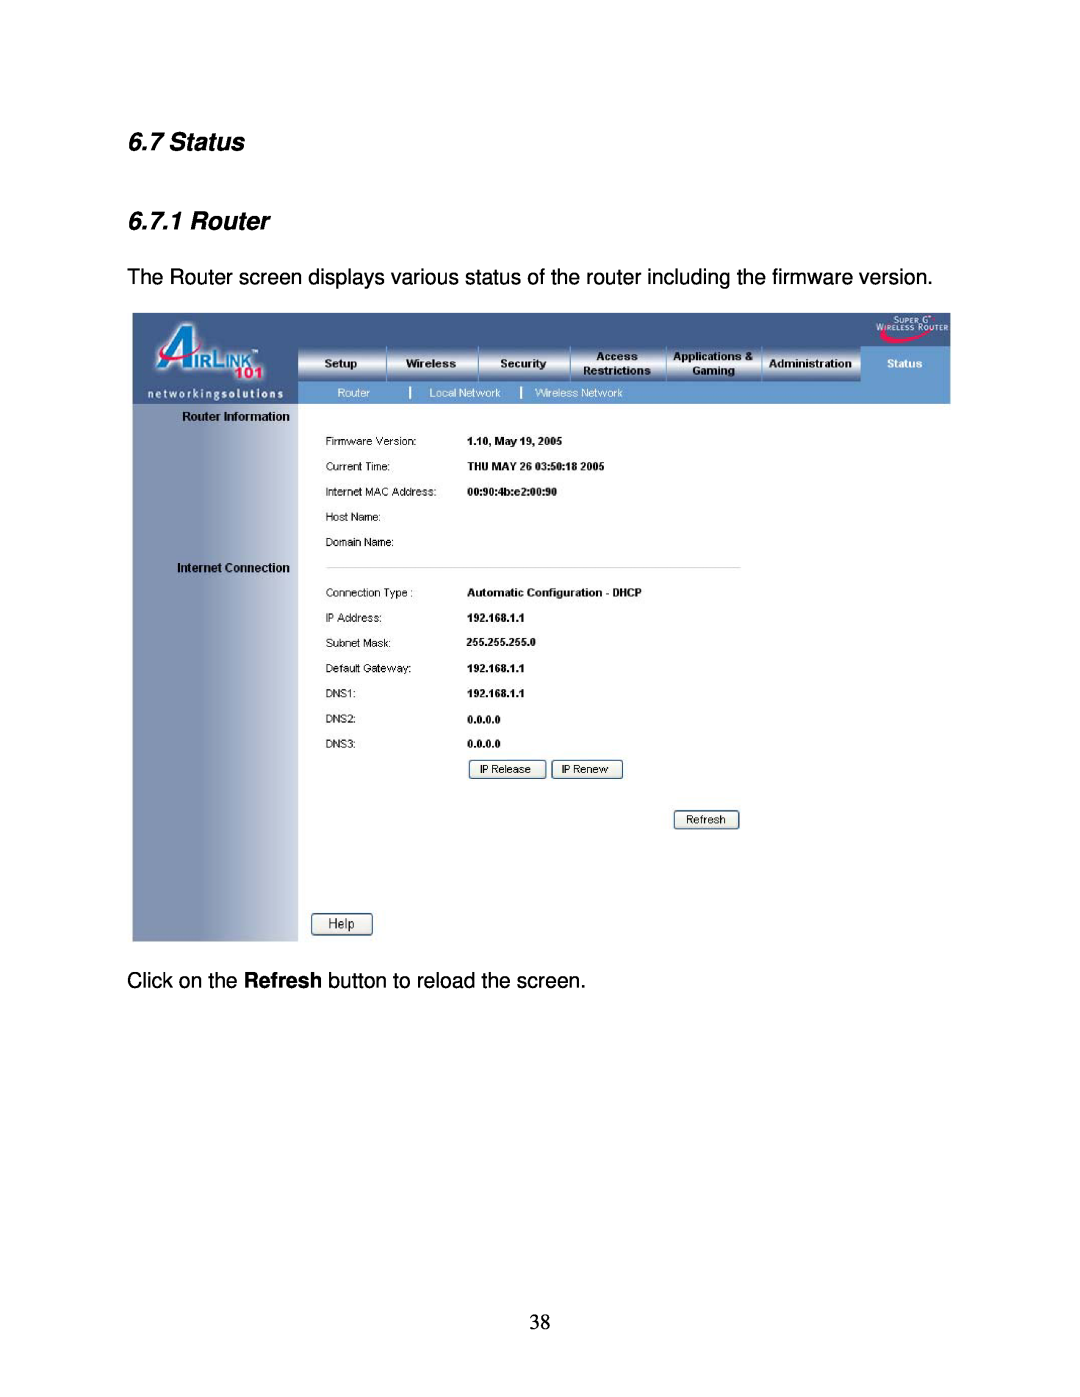 Airlink101 AR420W user manual Status 6.7.1 Router, Click on the Refresh button to reload the screen 